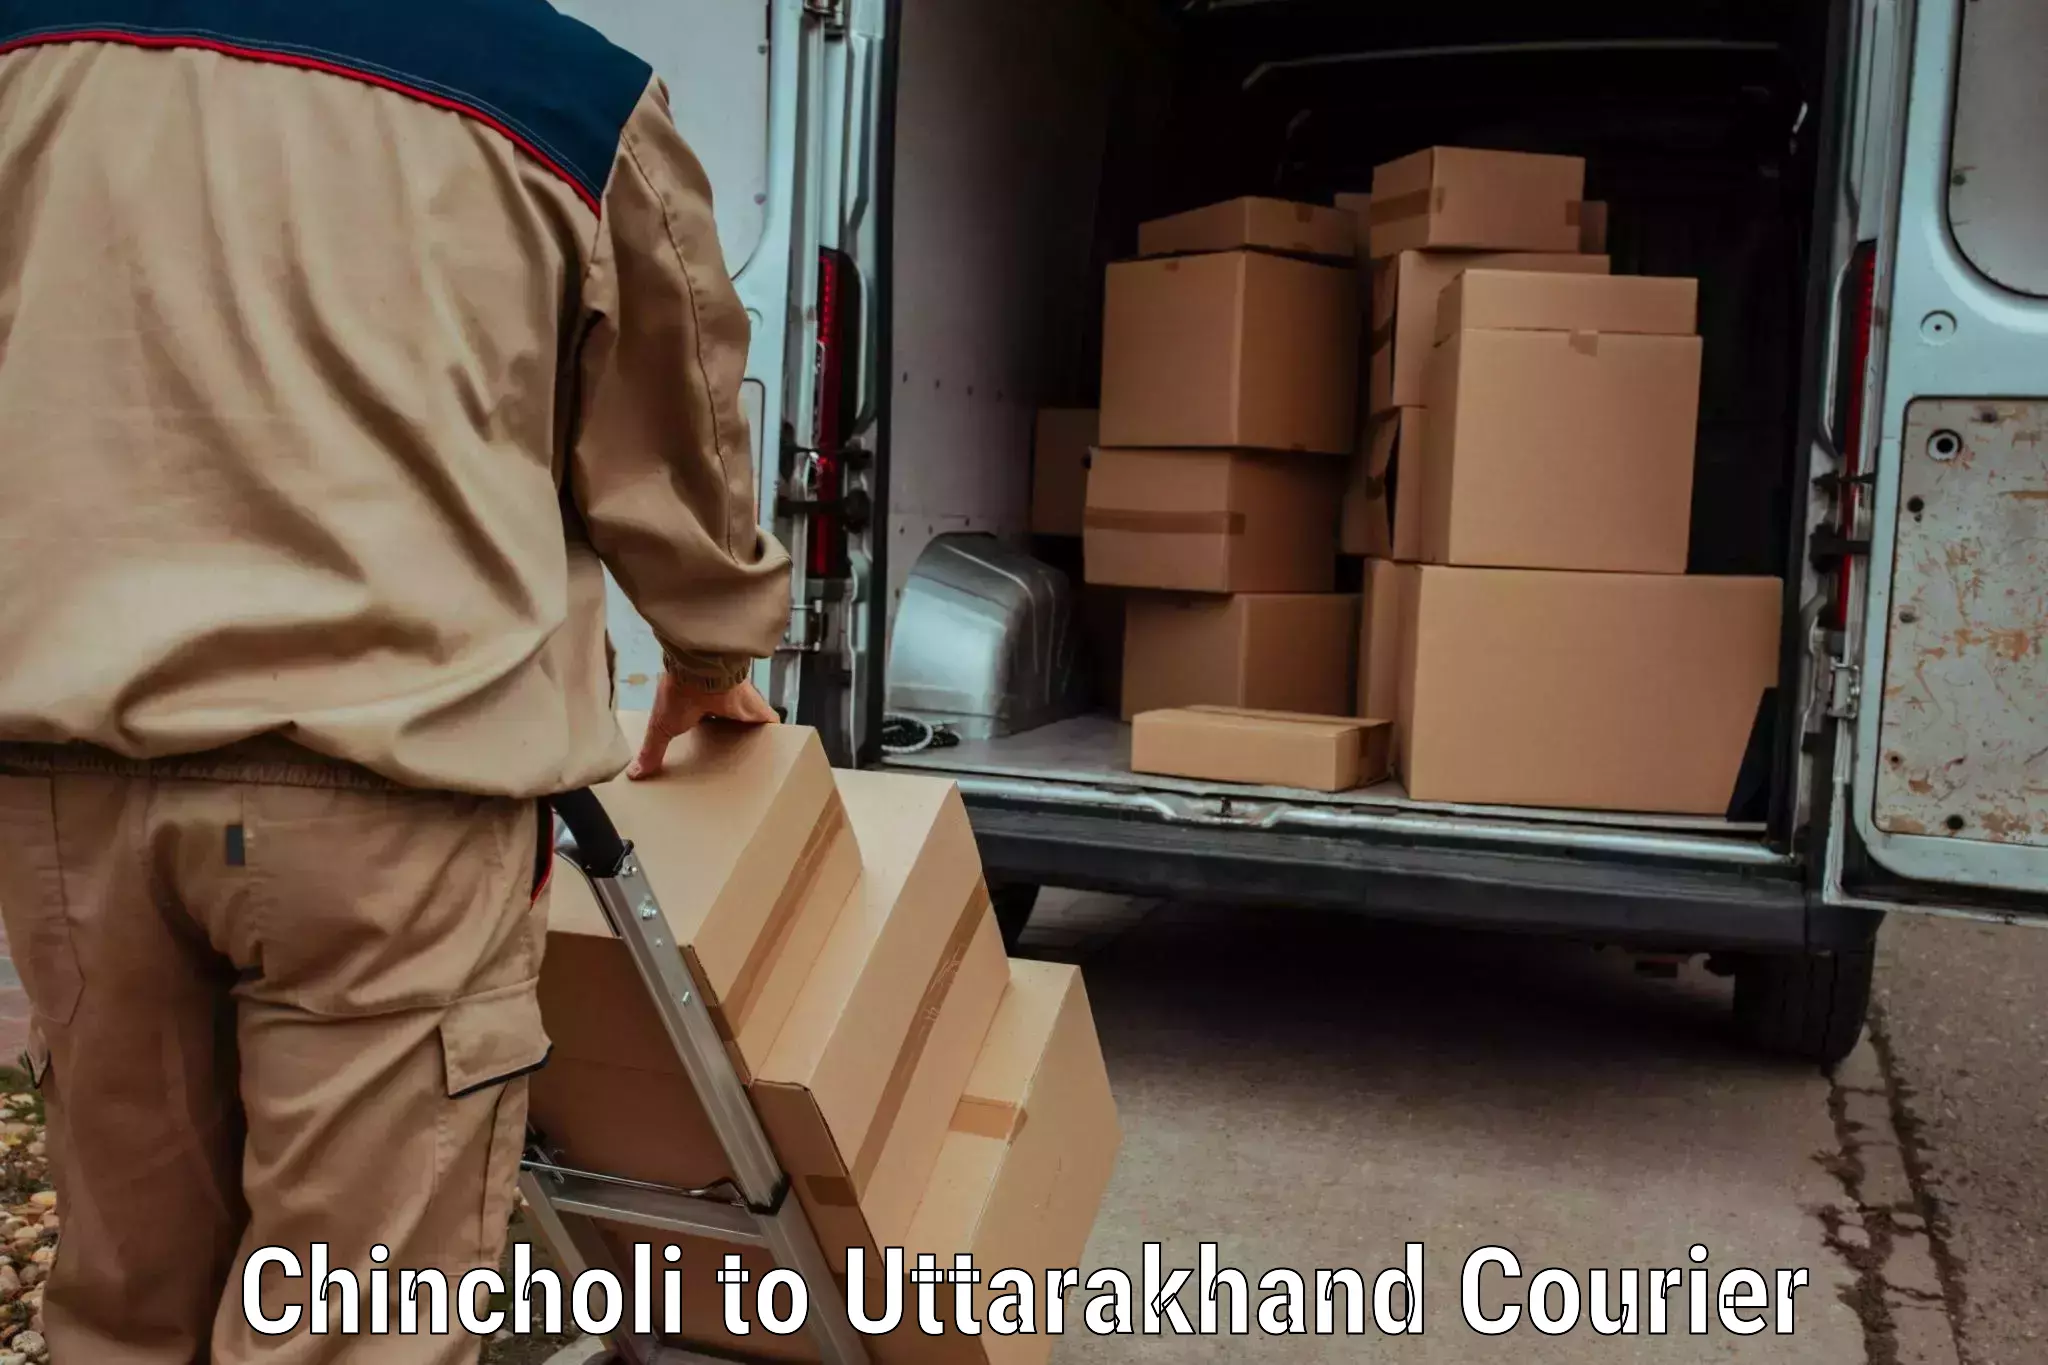 Multi-national courier services Chincholi to Tehri